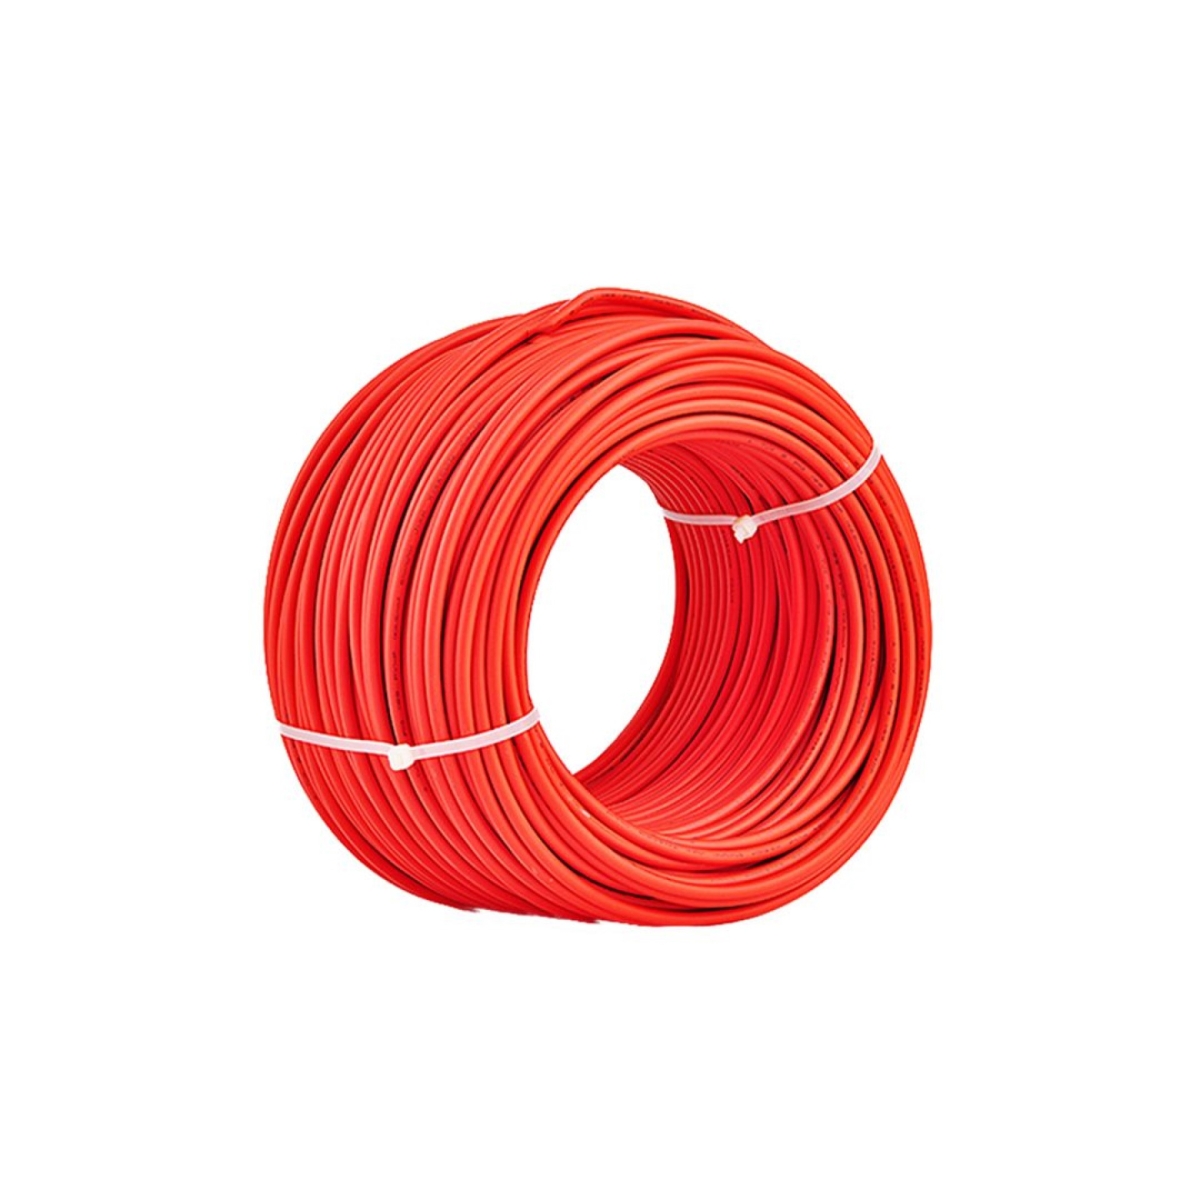 TommaTech 10.0mm² Solar Cable PVI1-F Red 1 Meter